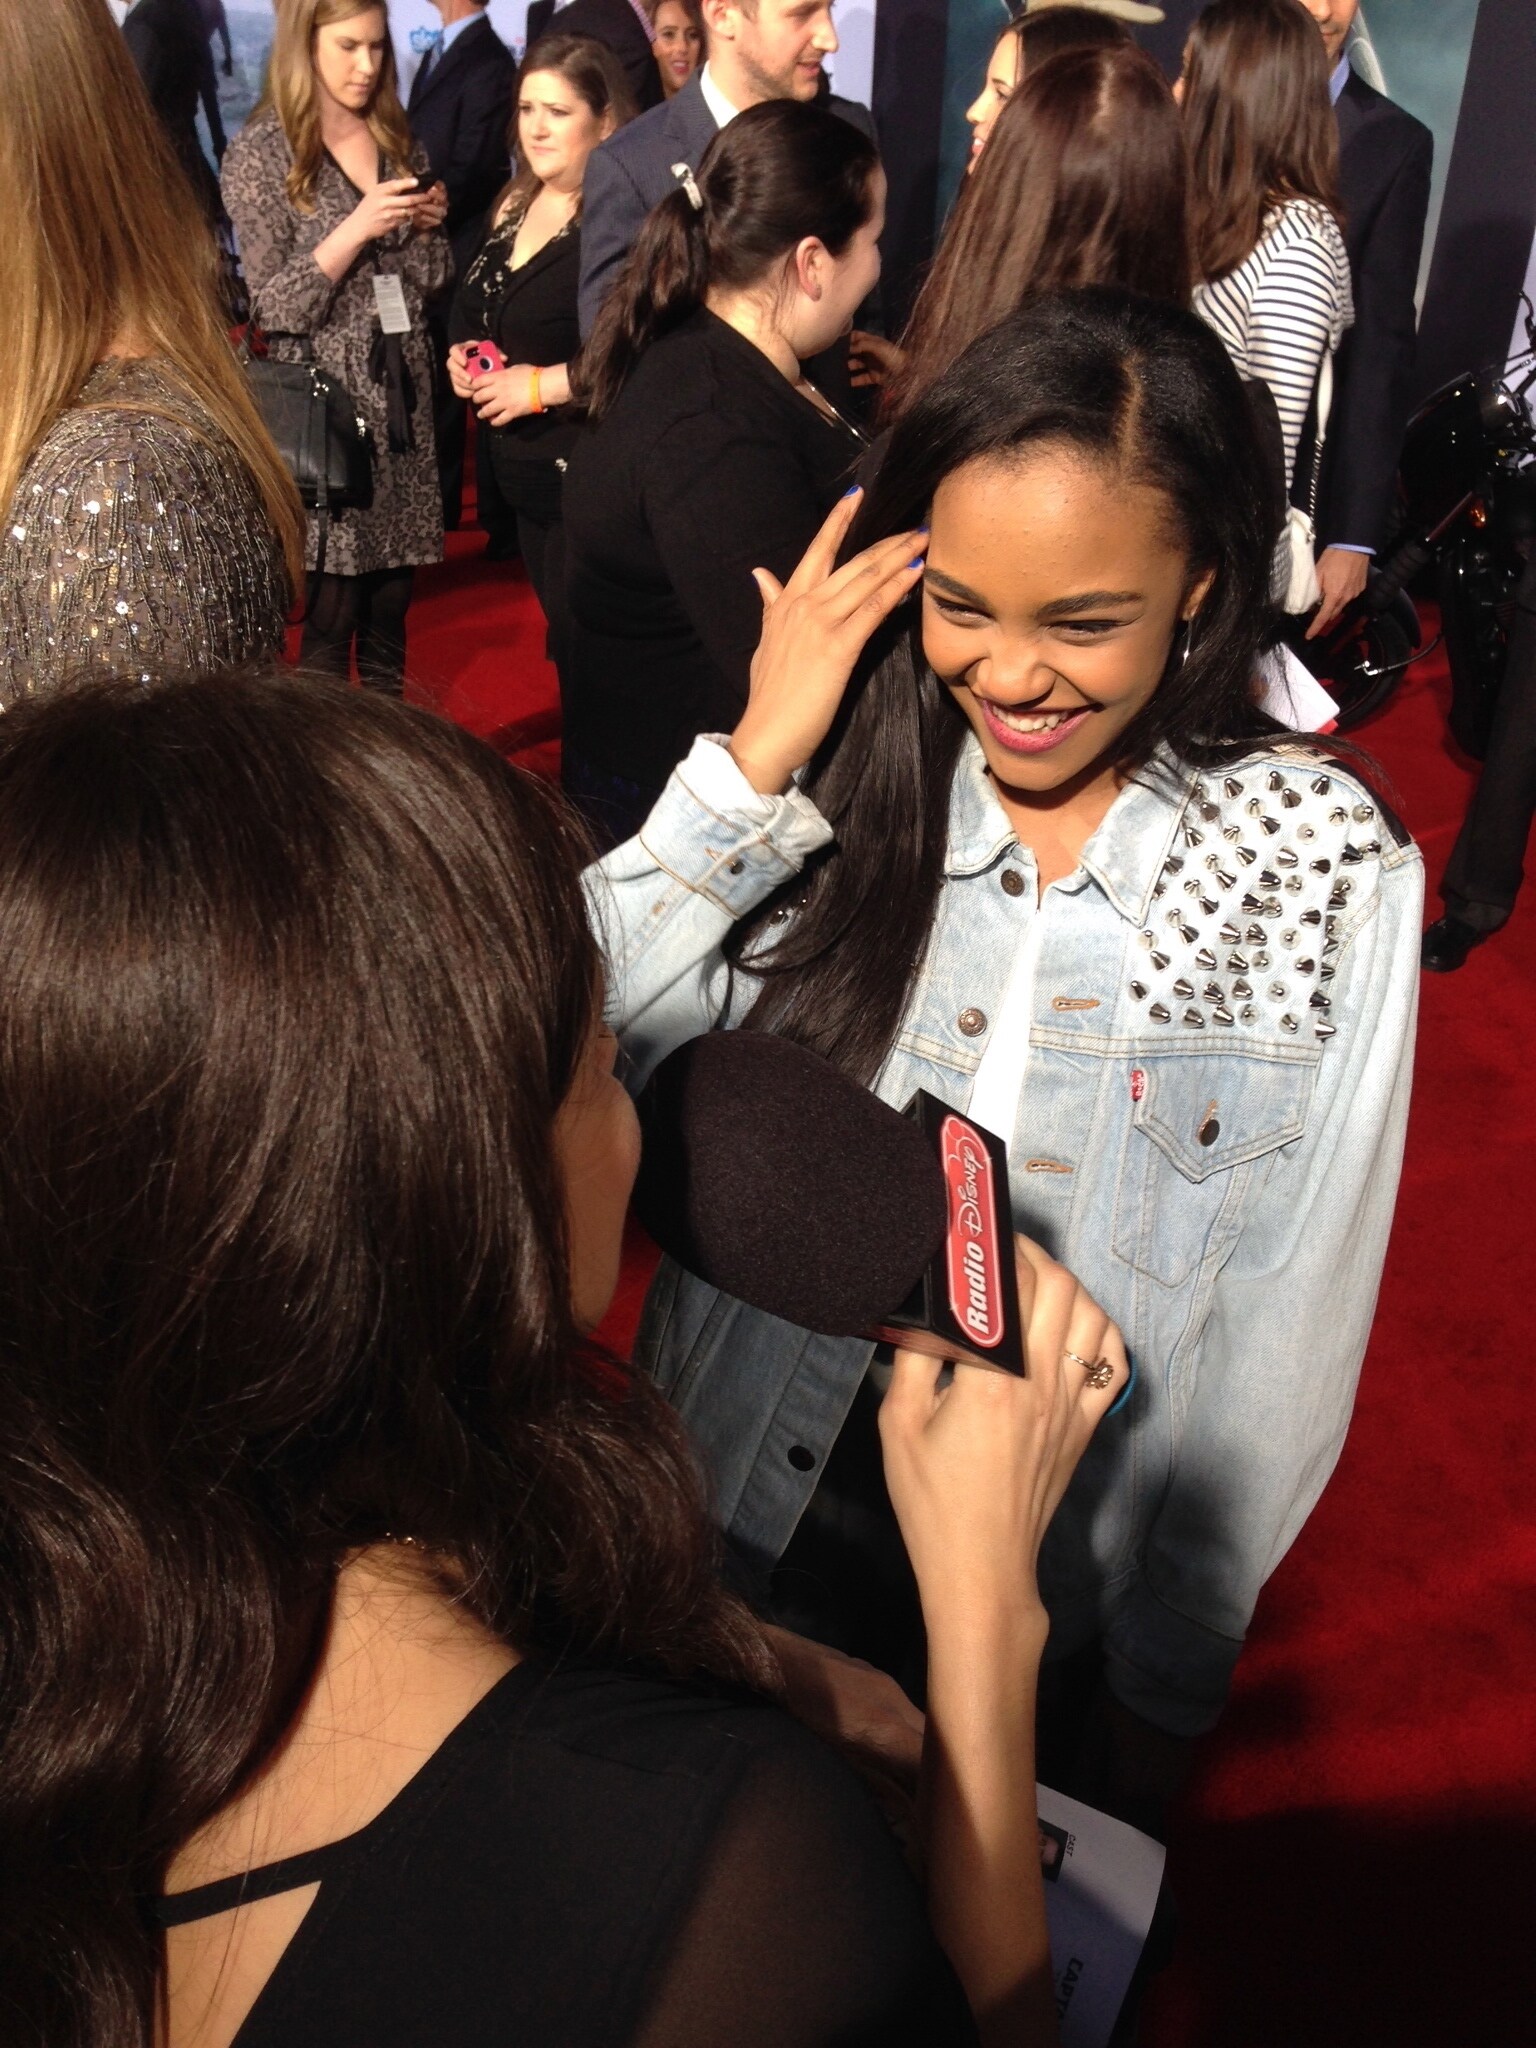 China Anne McClain at Captain America: The Winter Soldier